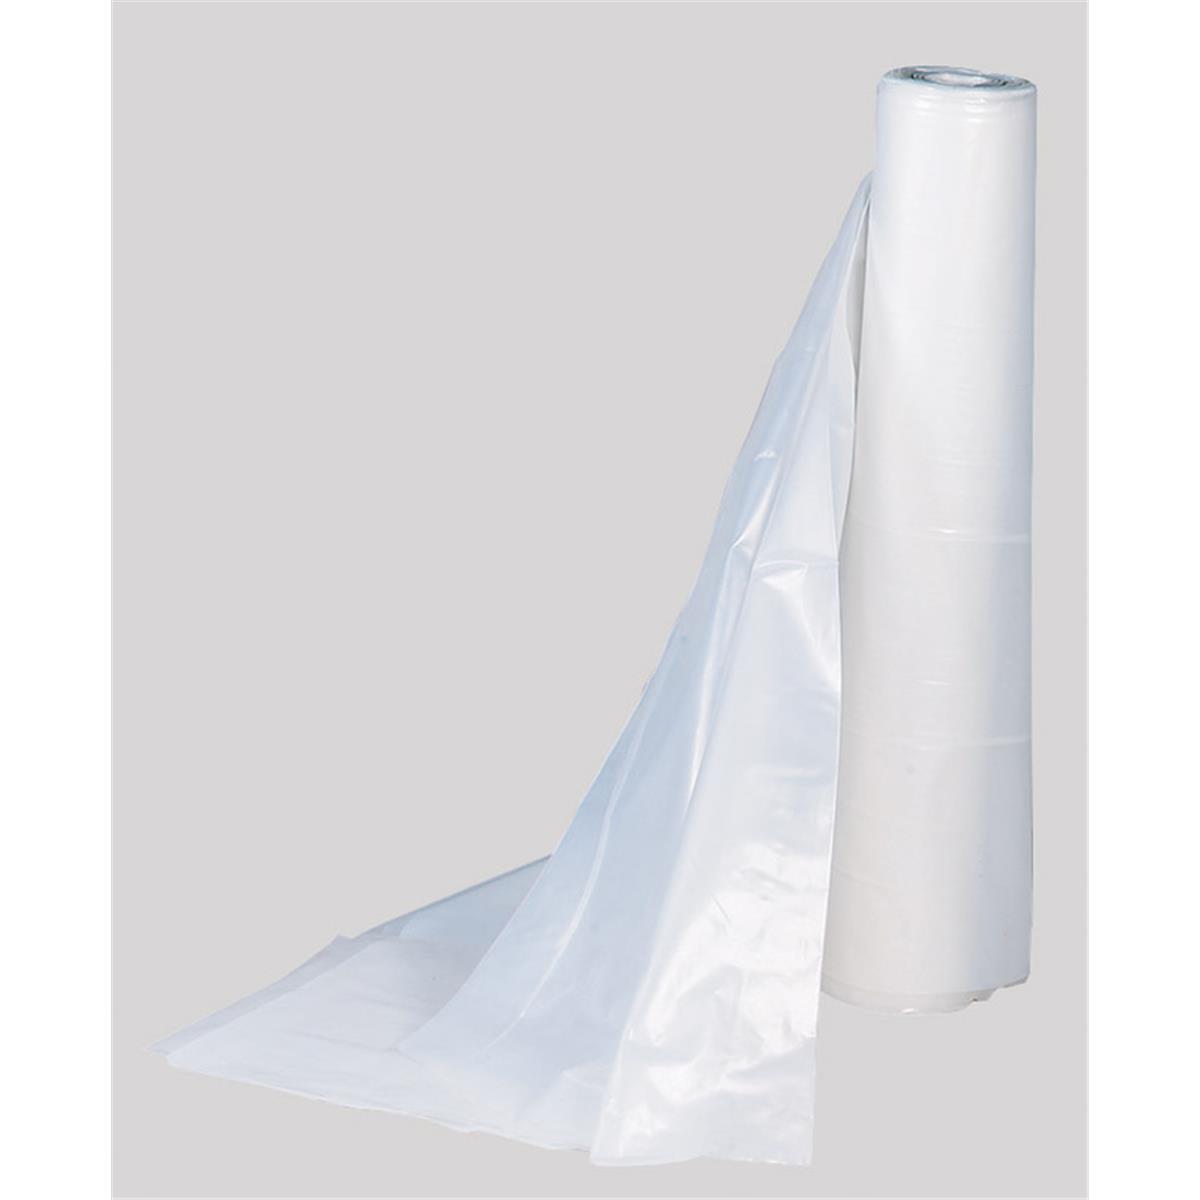 Picture of Berry Plastics 625922 4 mil 10 x 100 ft. Film Polyethylene Sheeting - Clear